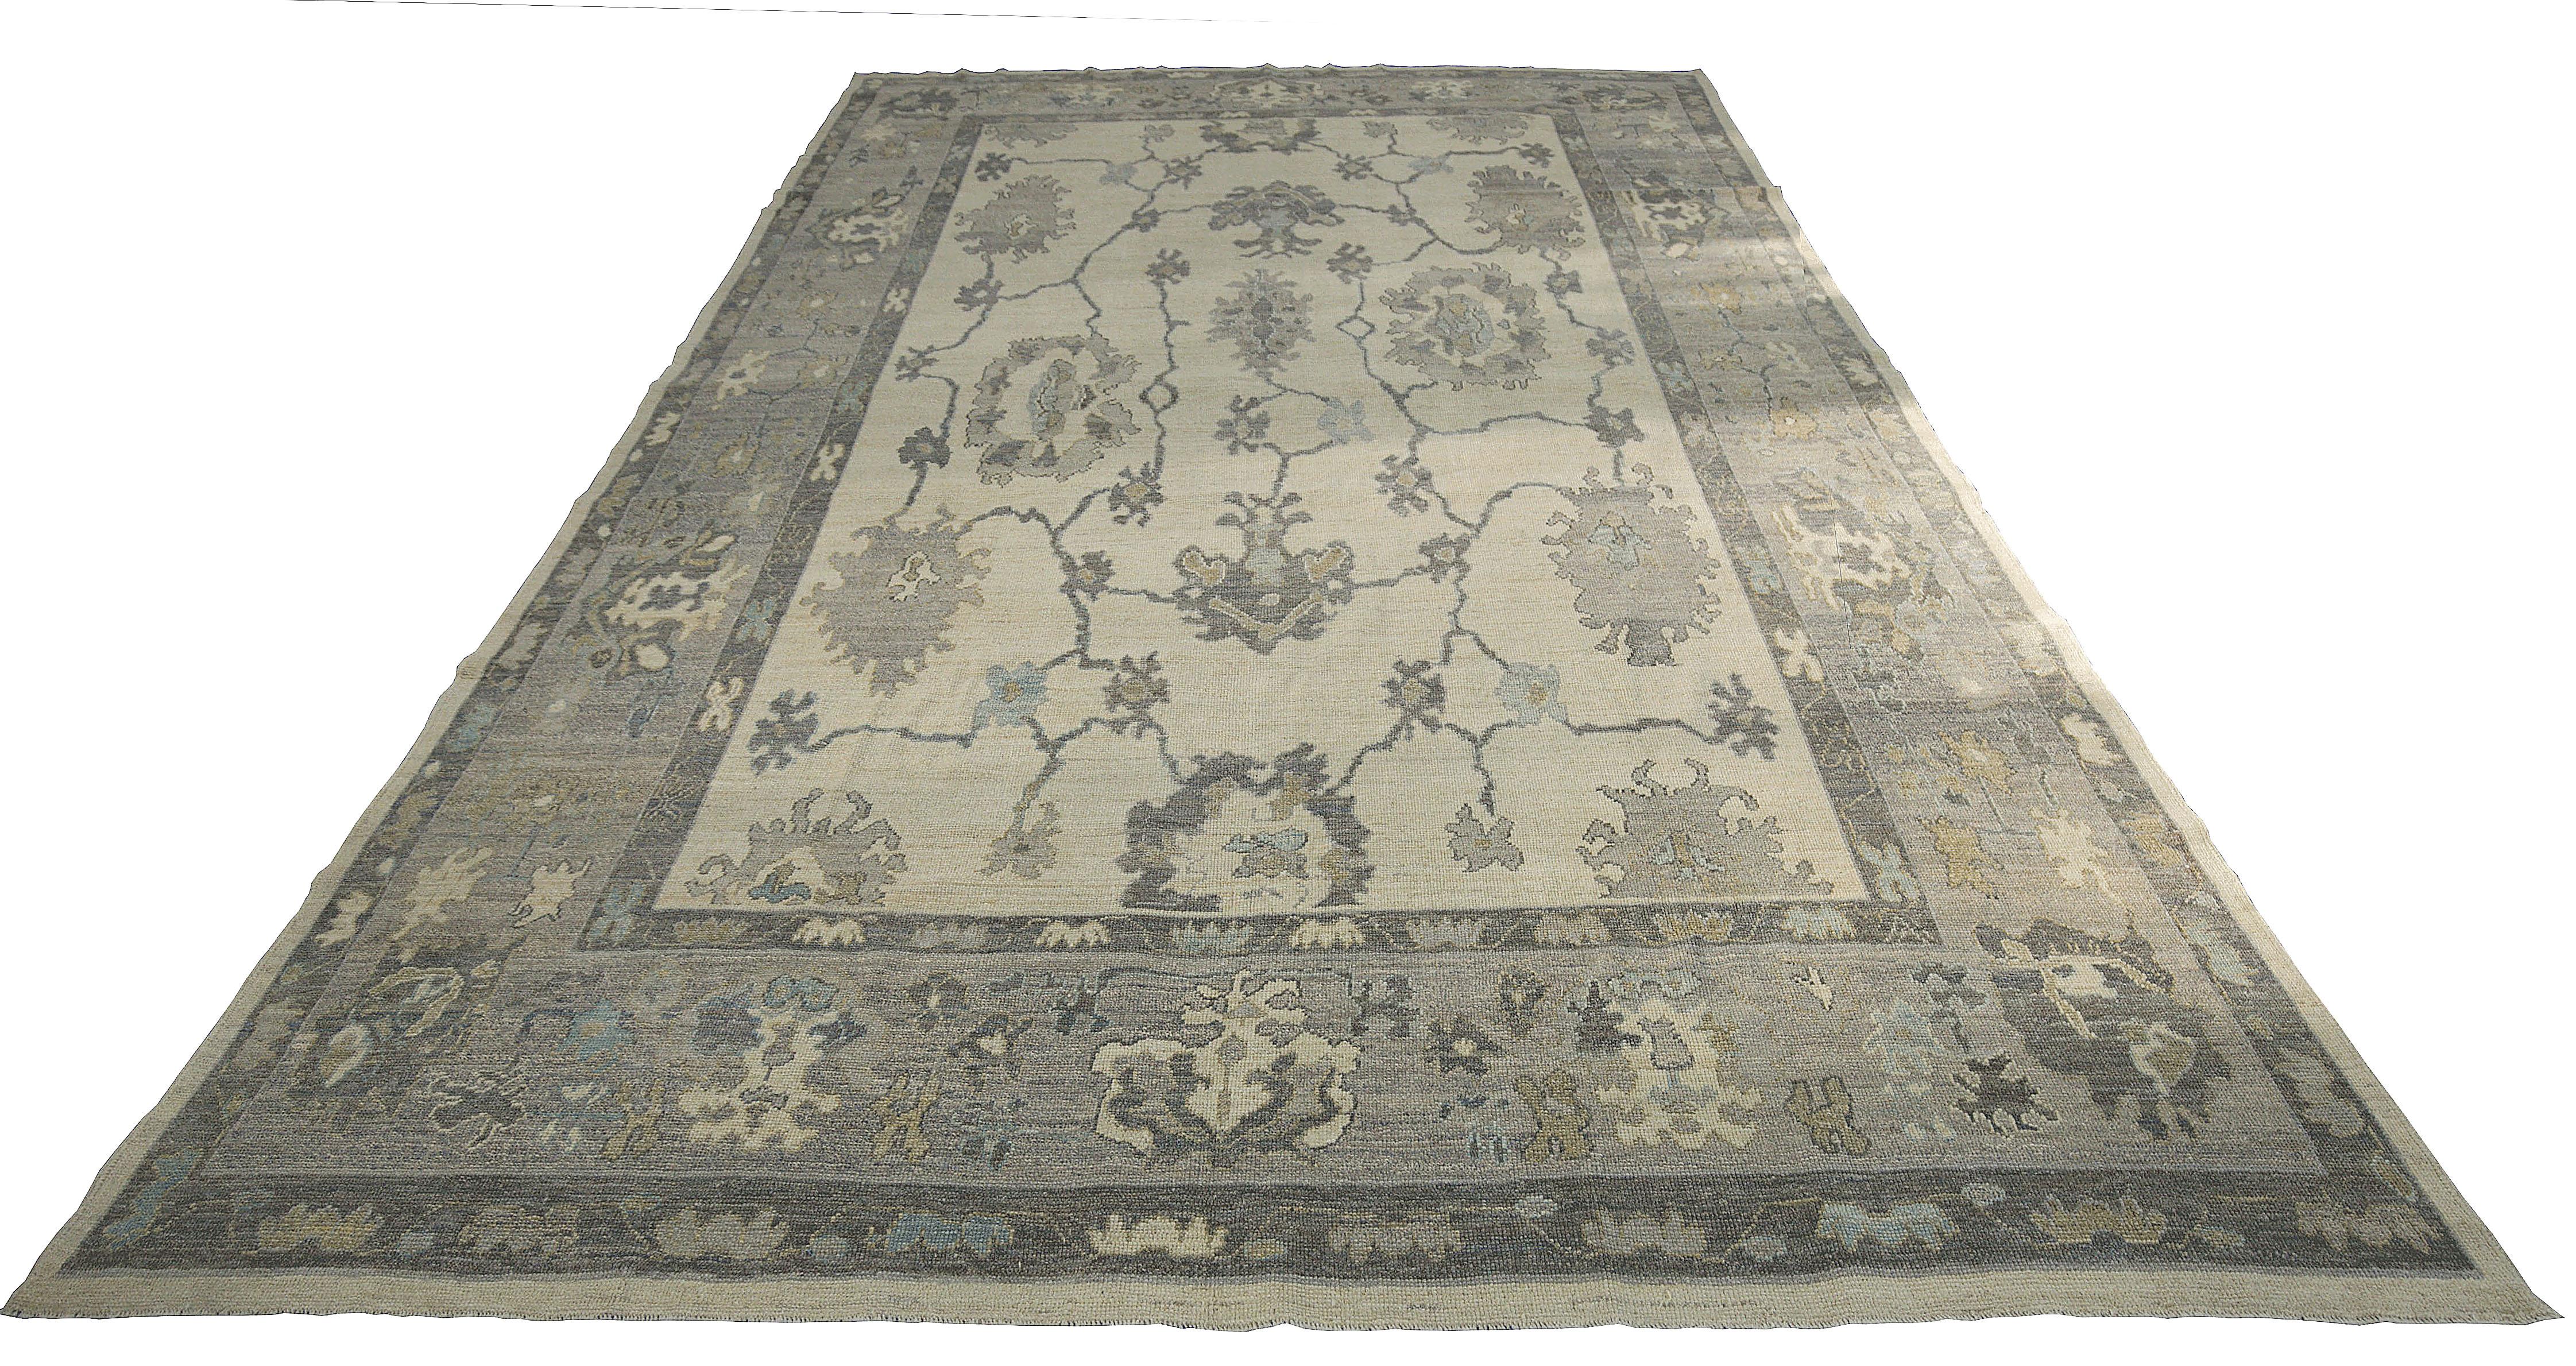 Contemporary Turkish runner rug made of handwoven sheep’s wool of the finest quality. It’s colored with organic vegetable dyes that are certified safe for humans and pets alike. It features a beautiful ivory field with floral details in blue and